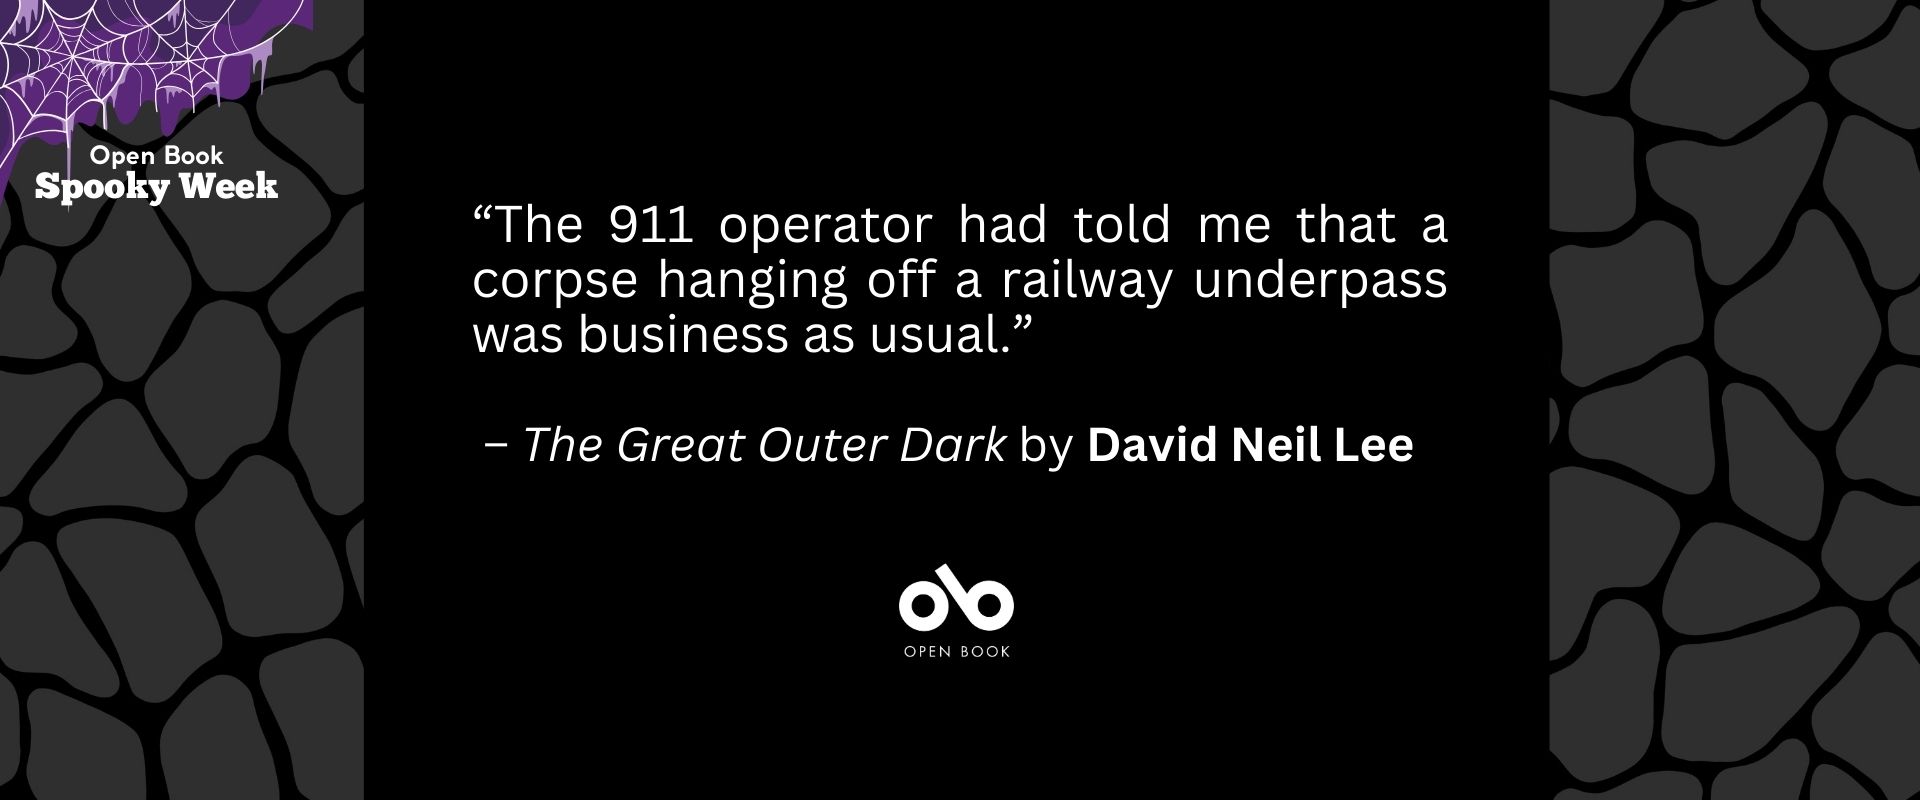 black banner image with text reading “The 911 operator had told me that a corpse hanging off a railway underpass was business as usual.”   – The Great Outer Dark by David Neil Lee